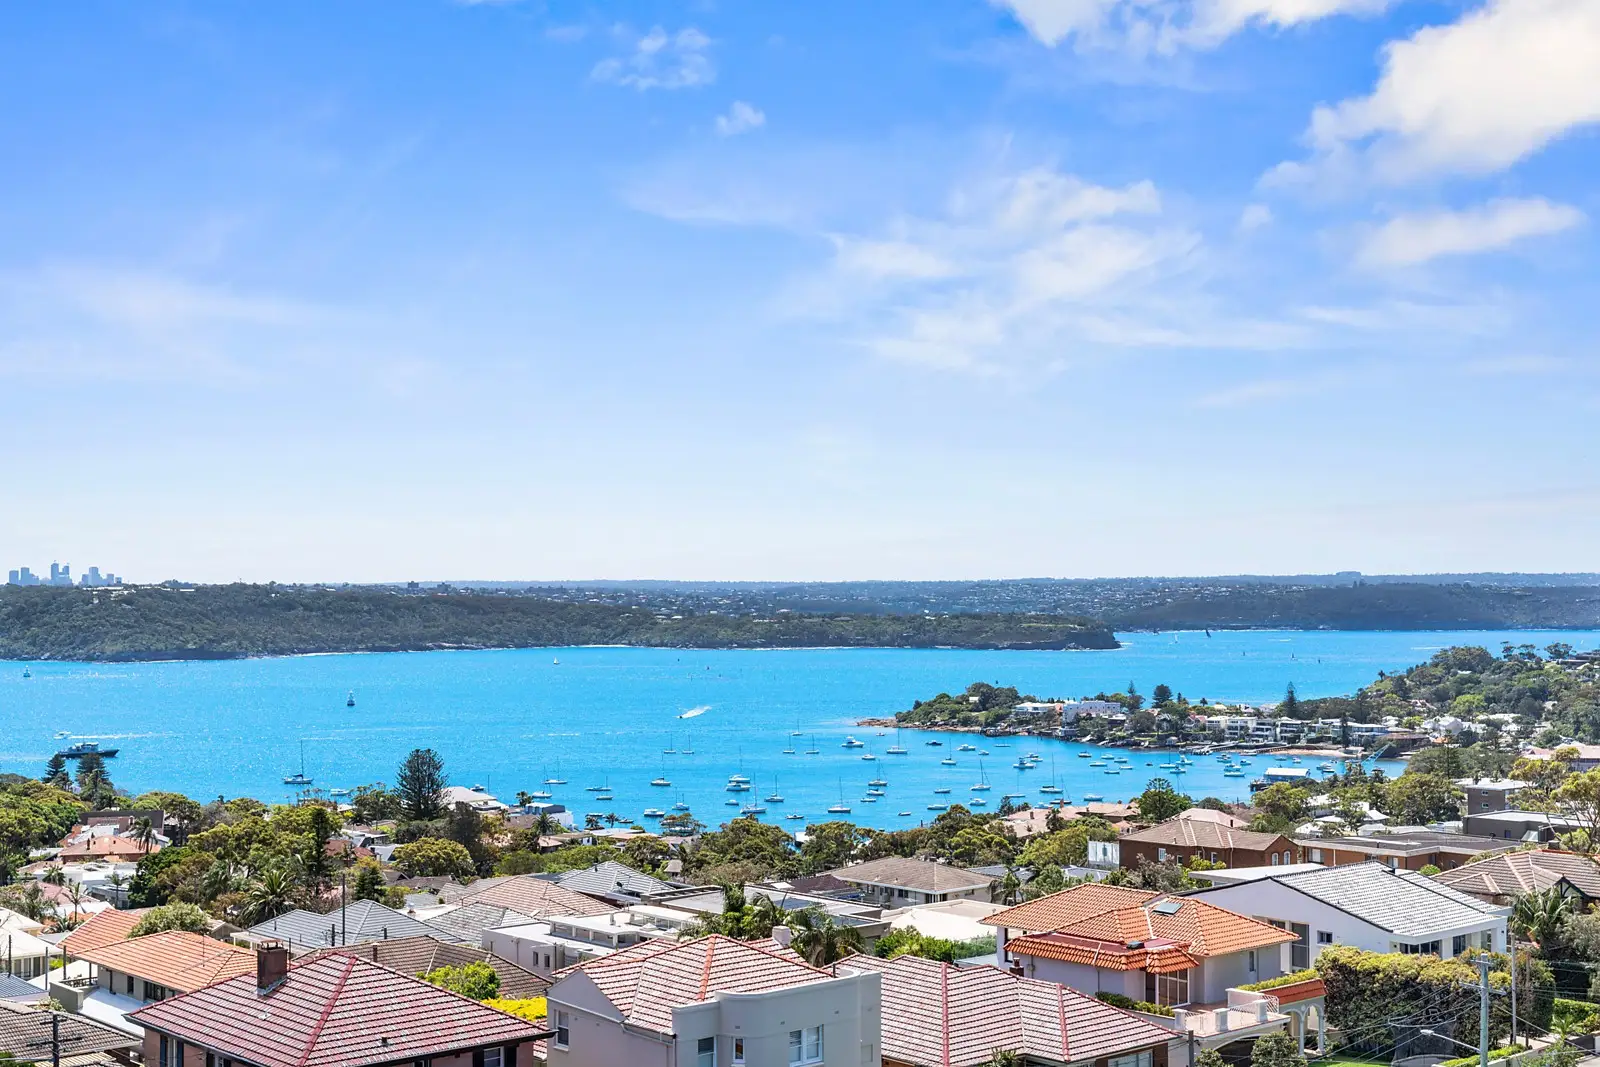 Photo #2: 214A Old South Head Road, Vaucluse - Sold by Sydney Sotheby's International Realty